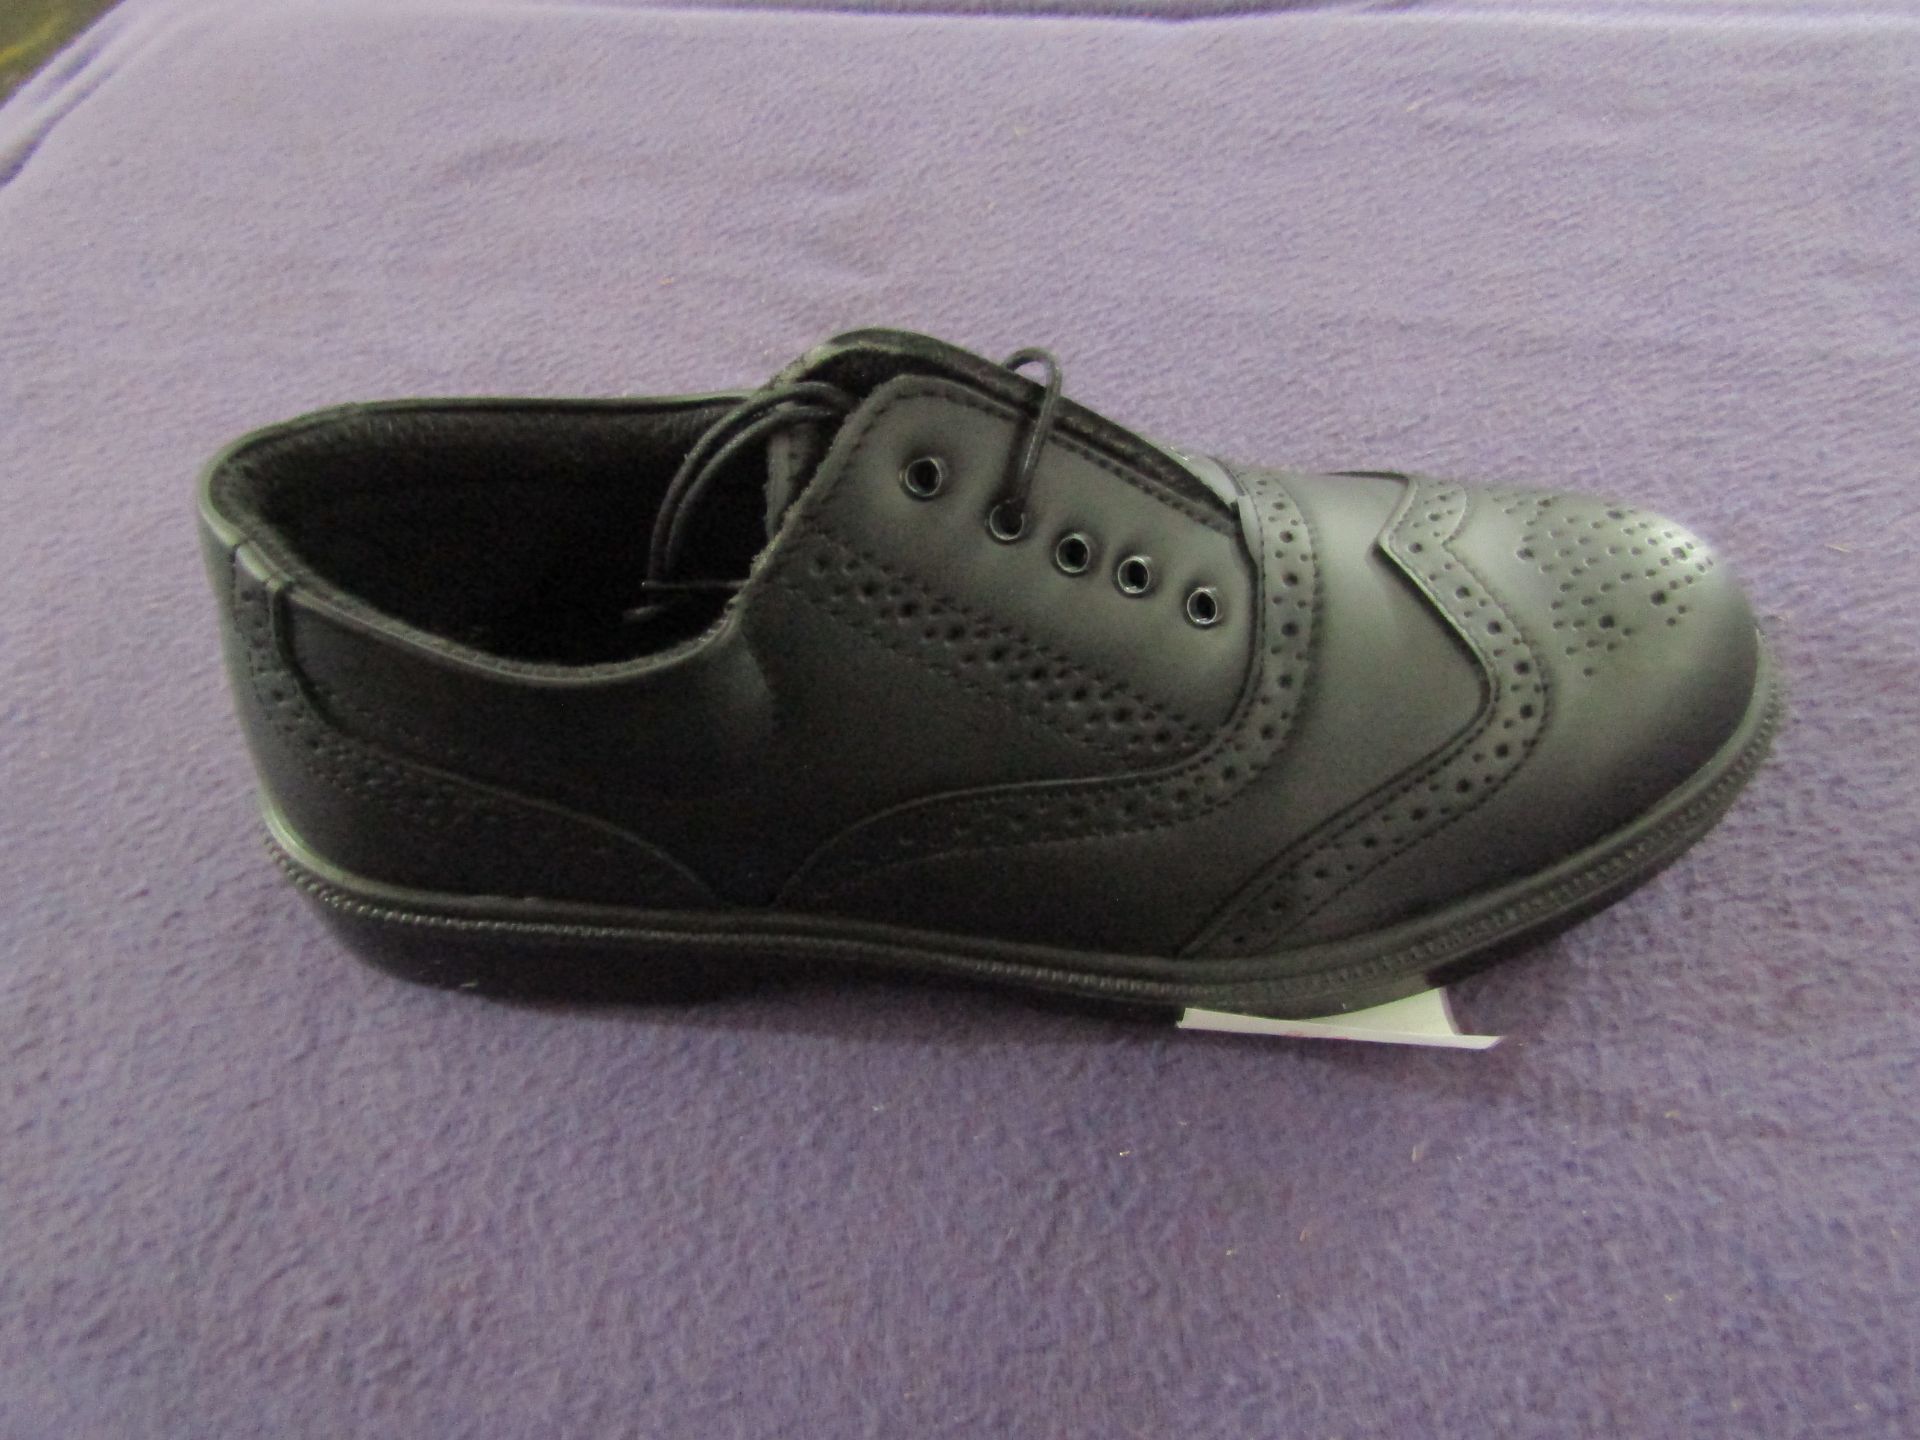 Tuskers - Black Pattened Design Steel Toe Cap Laced Shoes - Size 9 - Unused & Boxed.